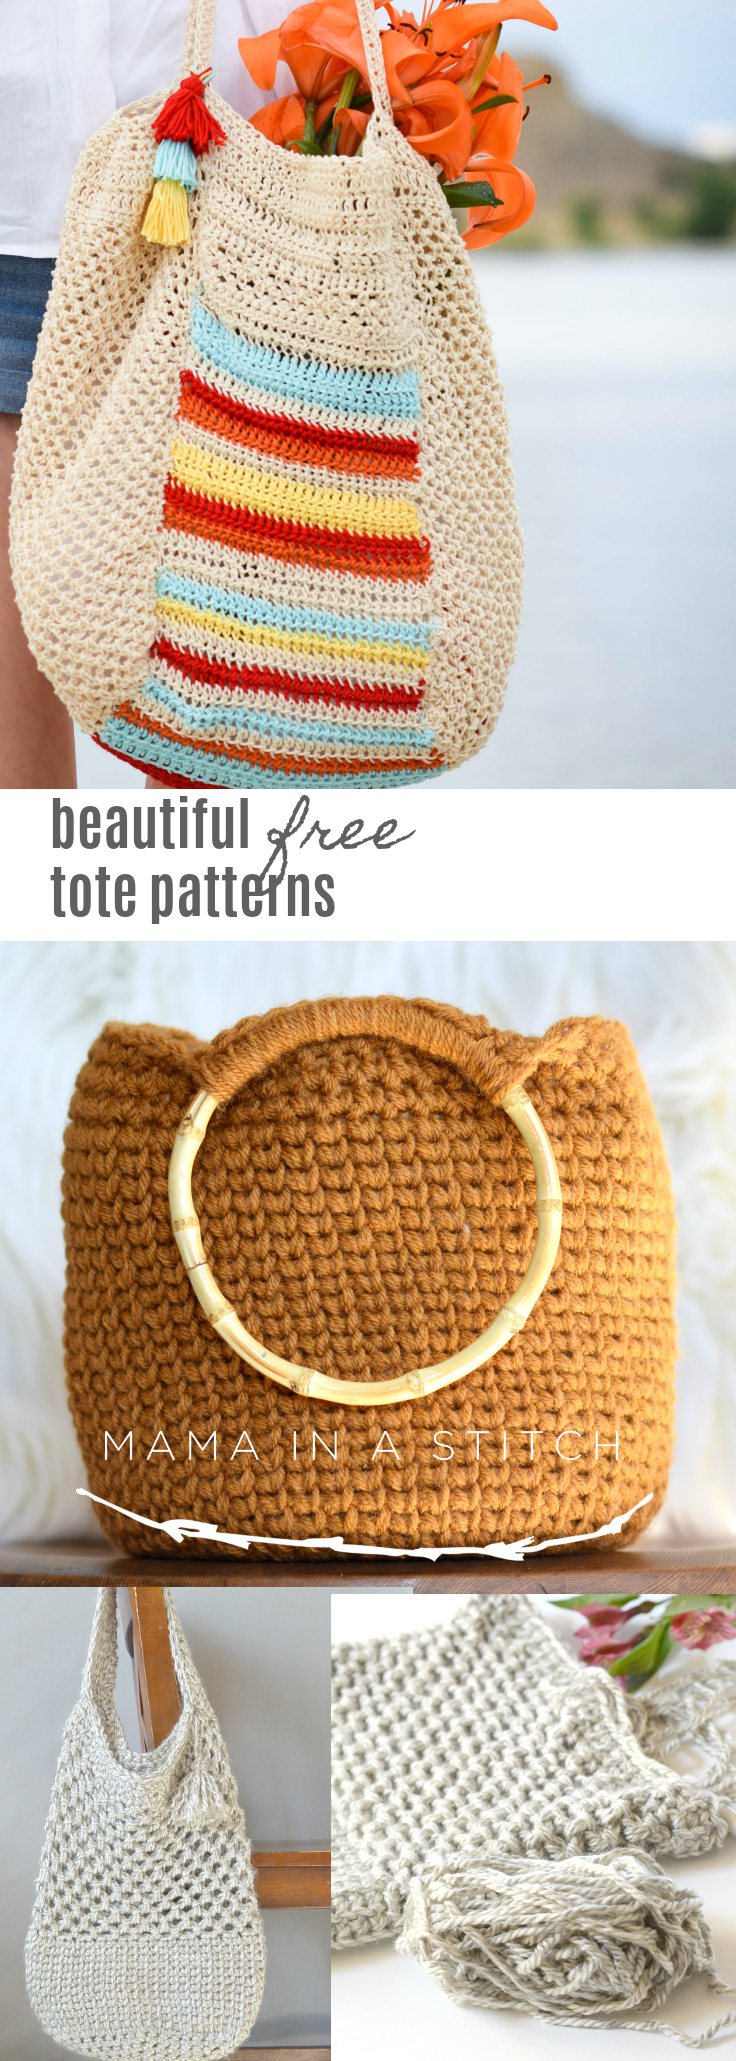 Free Knitting Patterns Bags Totes Purses Easy Crochet Knit Bag Patterns Mama In A Stitch